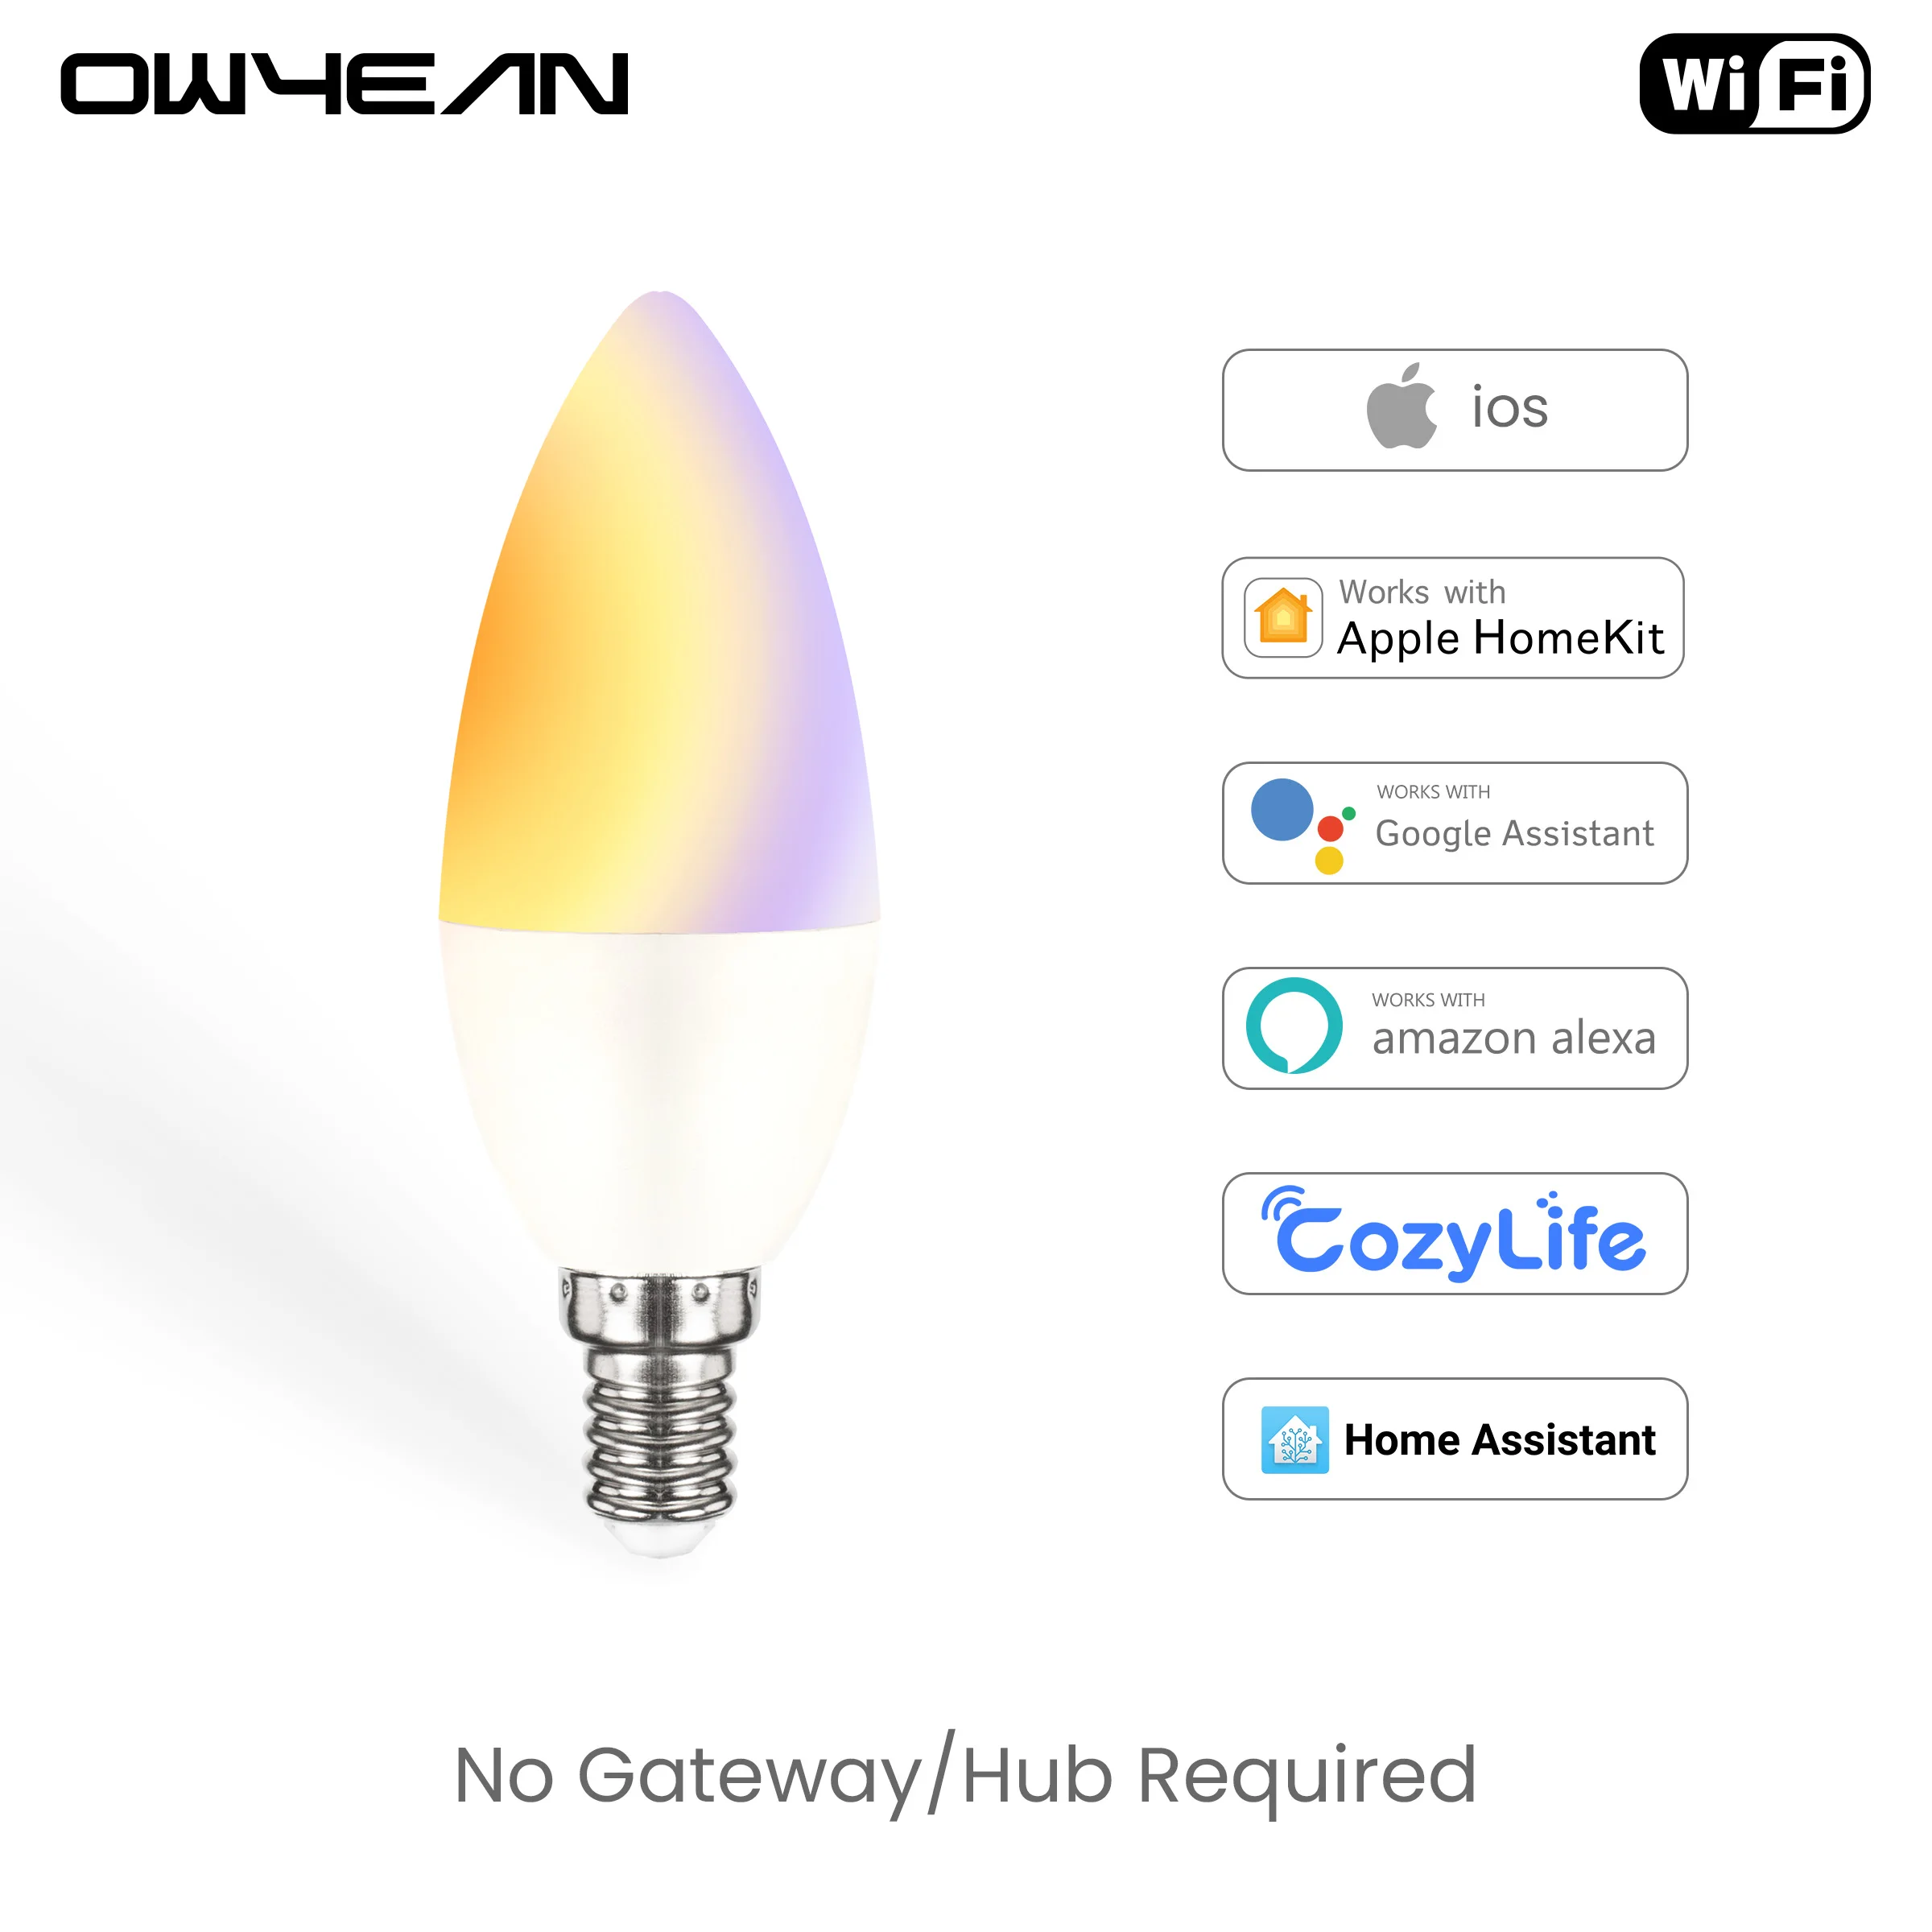 

WiFi 5W Smart E14 Dimmable CW RGB LED Candle Light Bulb Lamp Work with Apple Homekit Siri Alexa Google Home Assistant Cozylife